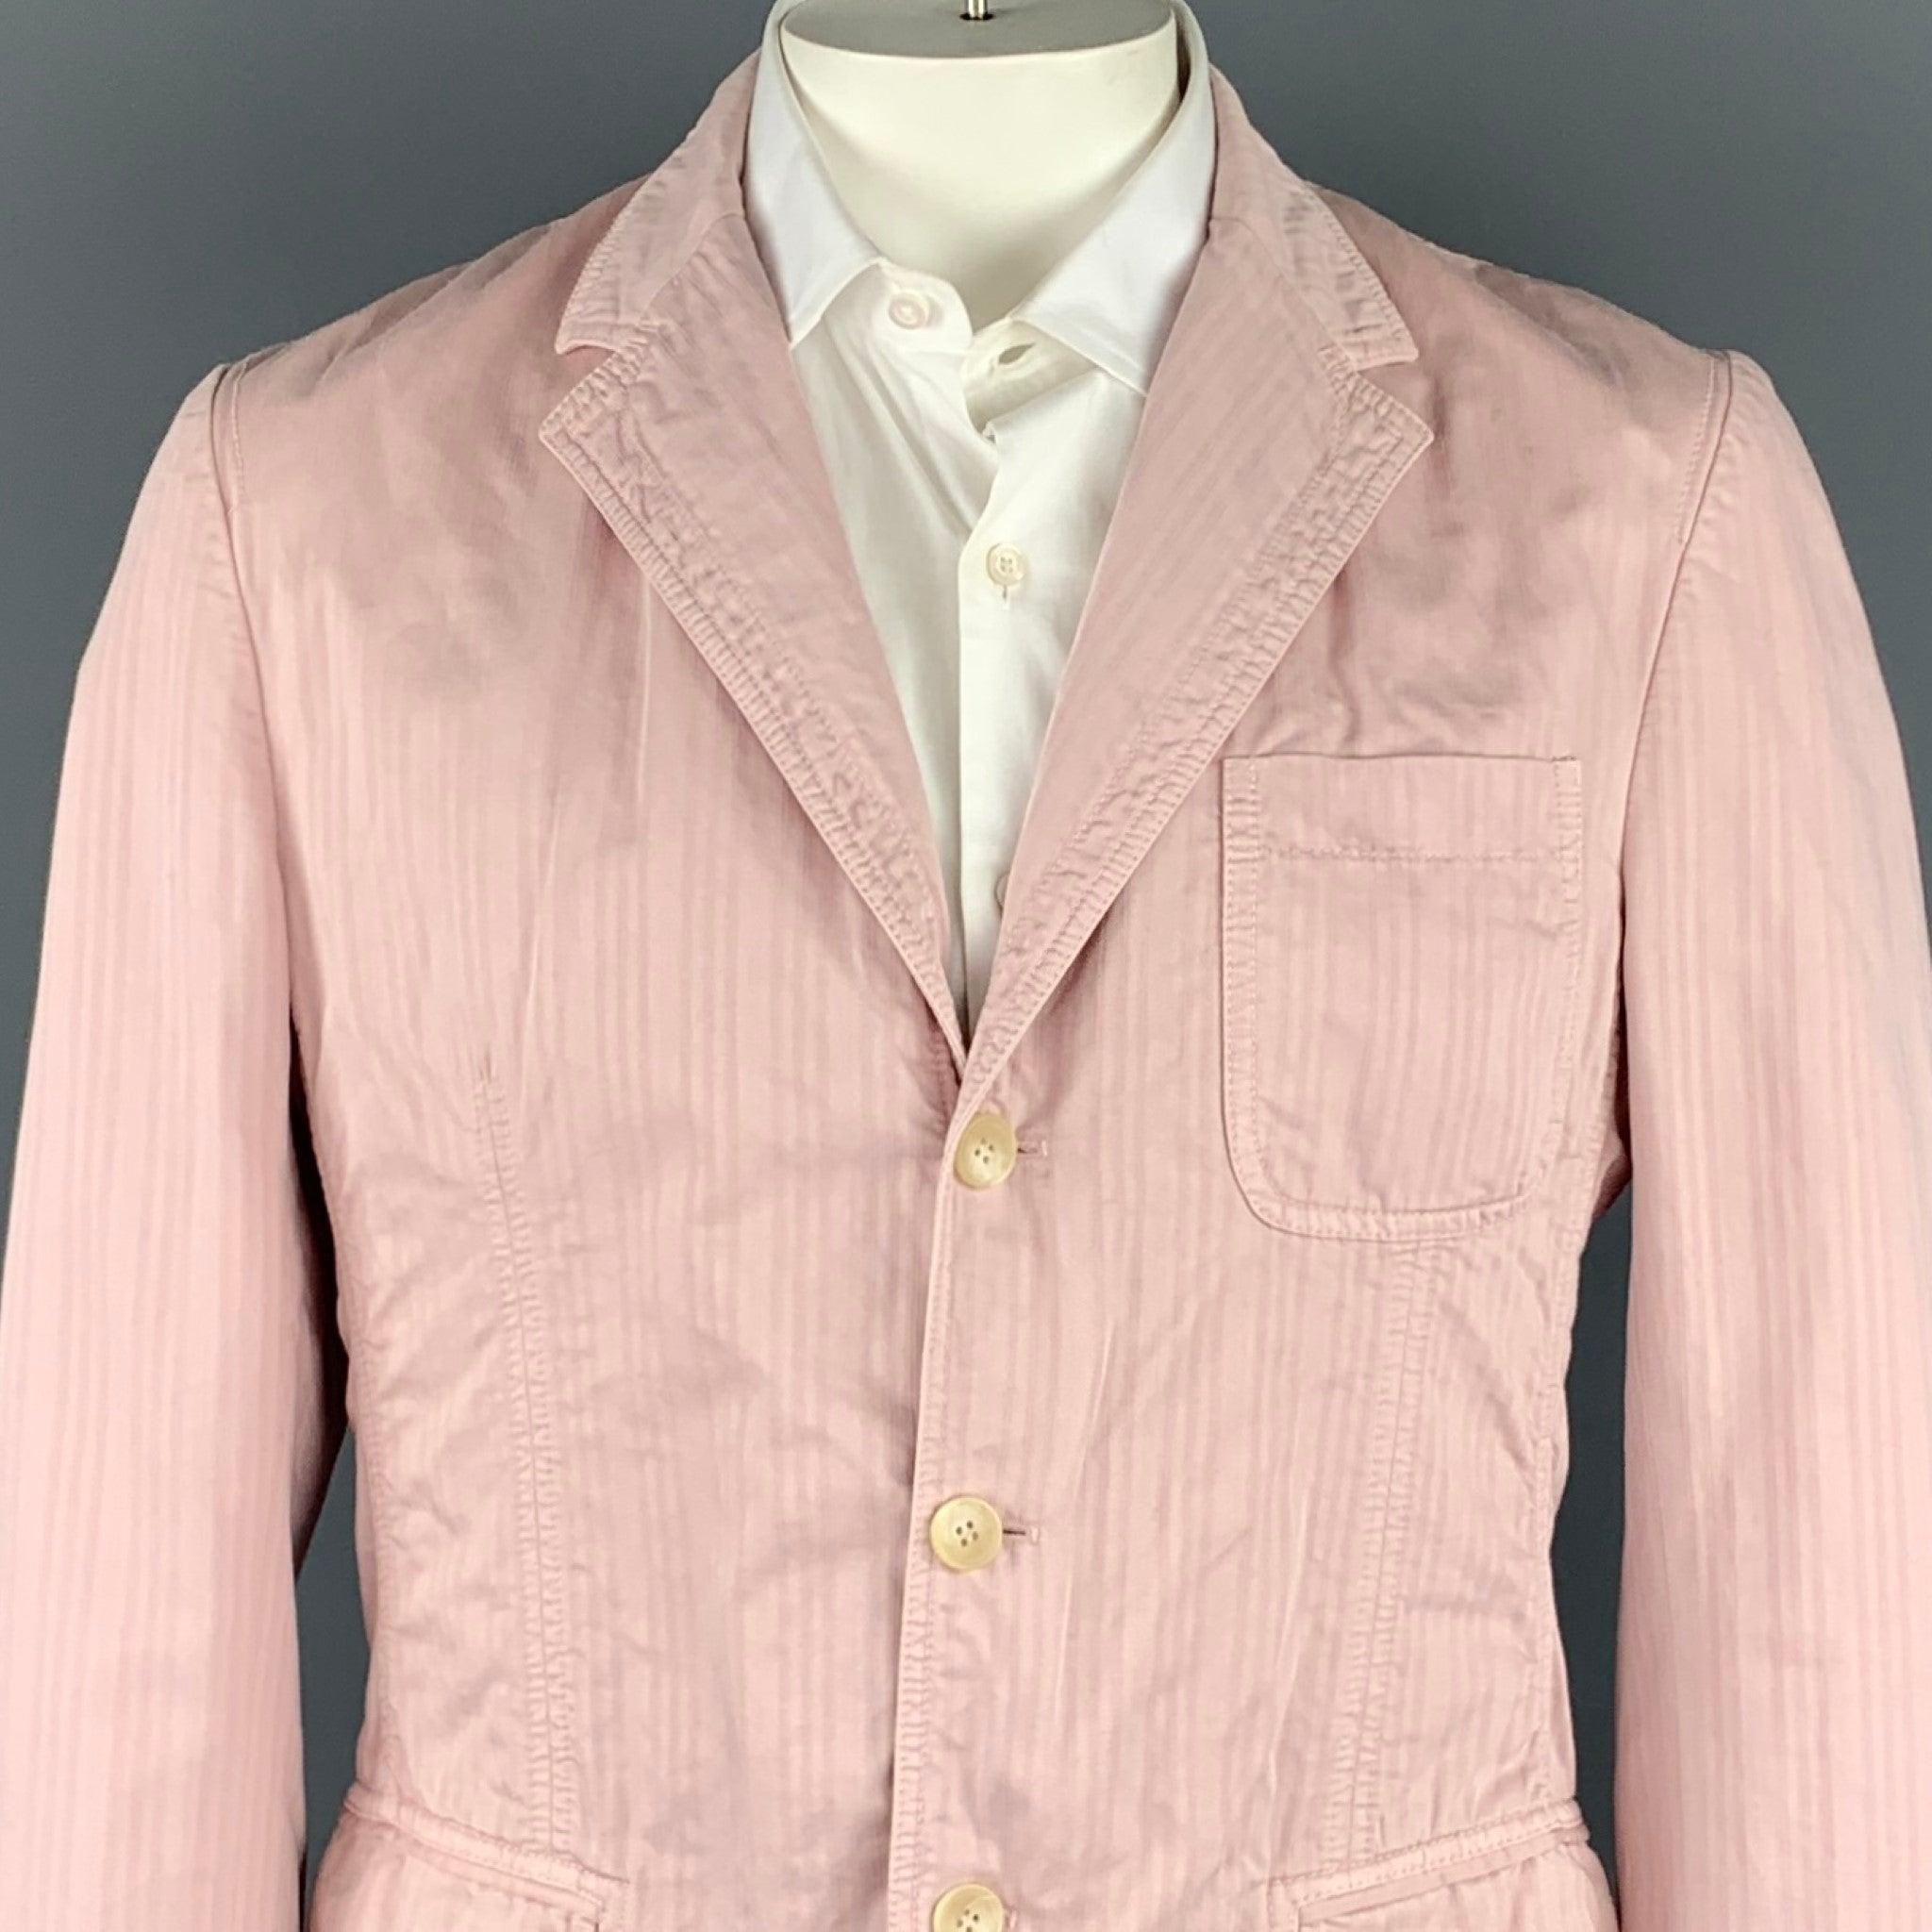 D&G by DOLCE & GABBANA sport coat comes in a rose stripe cotton featuring a notch lapel, flap pockets, and a thress button closure. Made in Romania.Very Good
Pre-Owned Condition. 

Marked:   38/52 

Measurements: 
 
Shoulder: 18 inches  Chest: 40